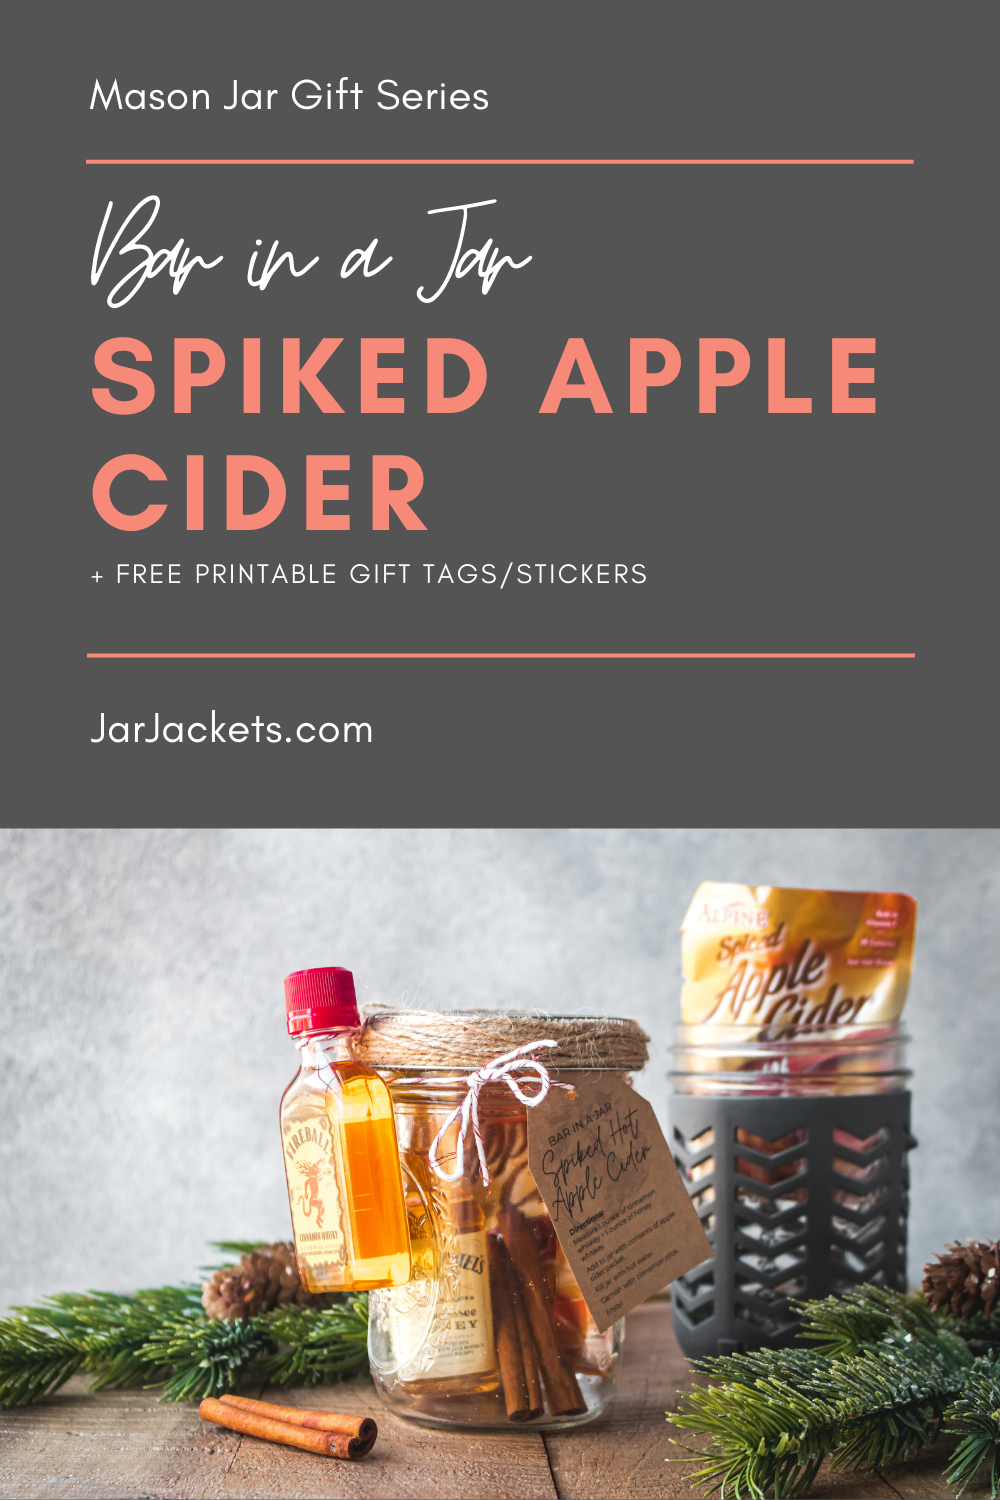 Two Mason jars are filled with all of the ingredients needed to make spiked apple cider, including a travel-sized bottle of Fireball Cinnamon Whiskey.